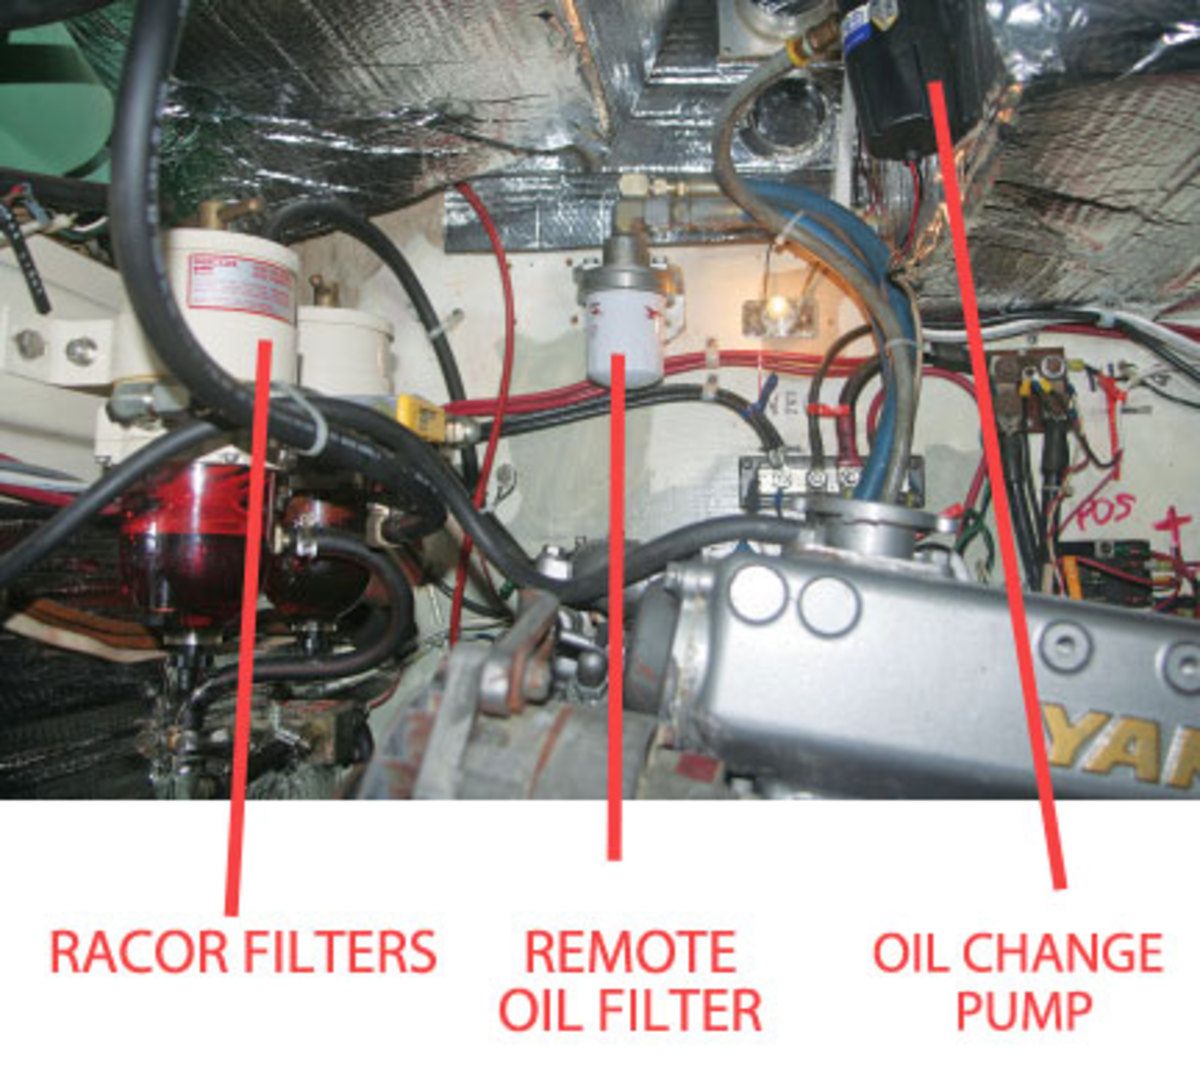 A wiring diagram for a typical bow thruster installation—Strider’s differs in some details